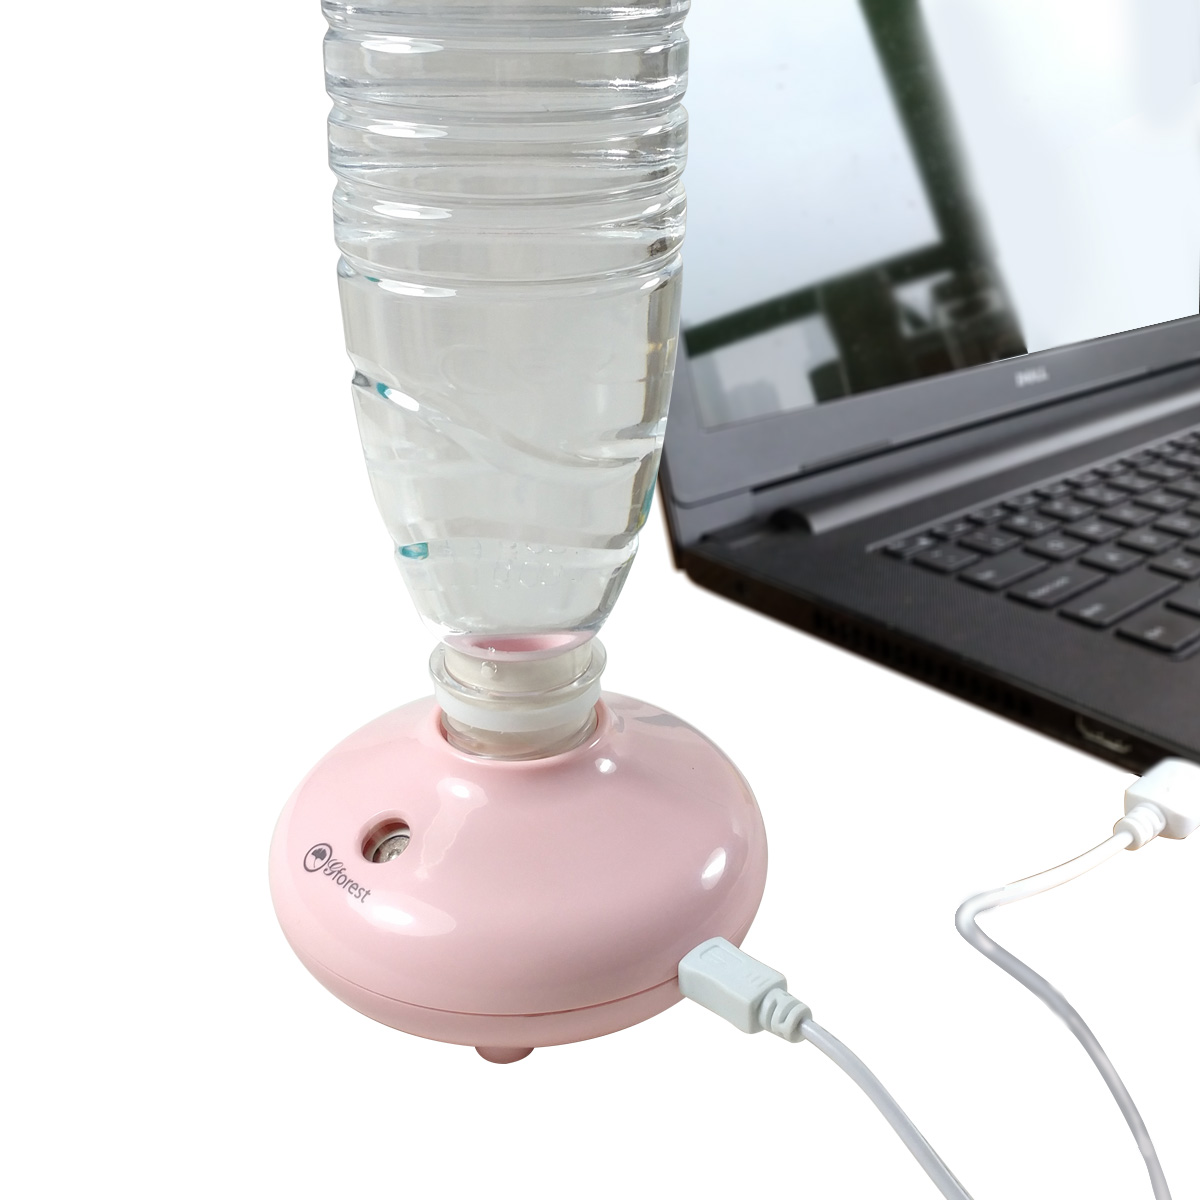 Cool Mist Personal Mini Humidifier  USB or Battery Operated Portable Travel Humidifying Device for u